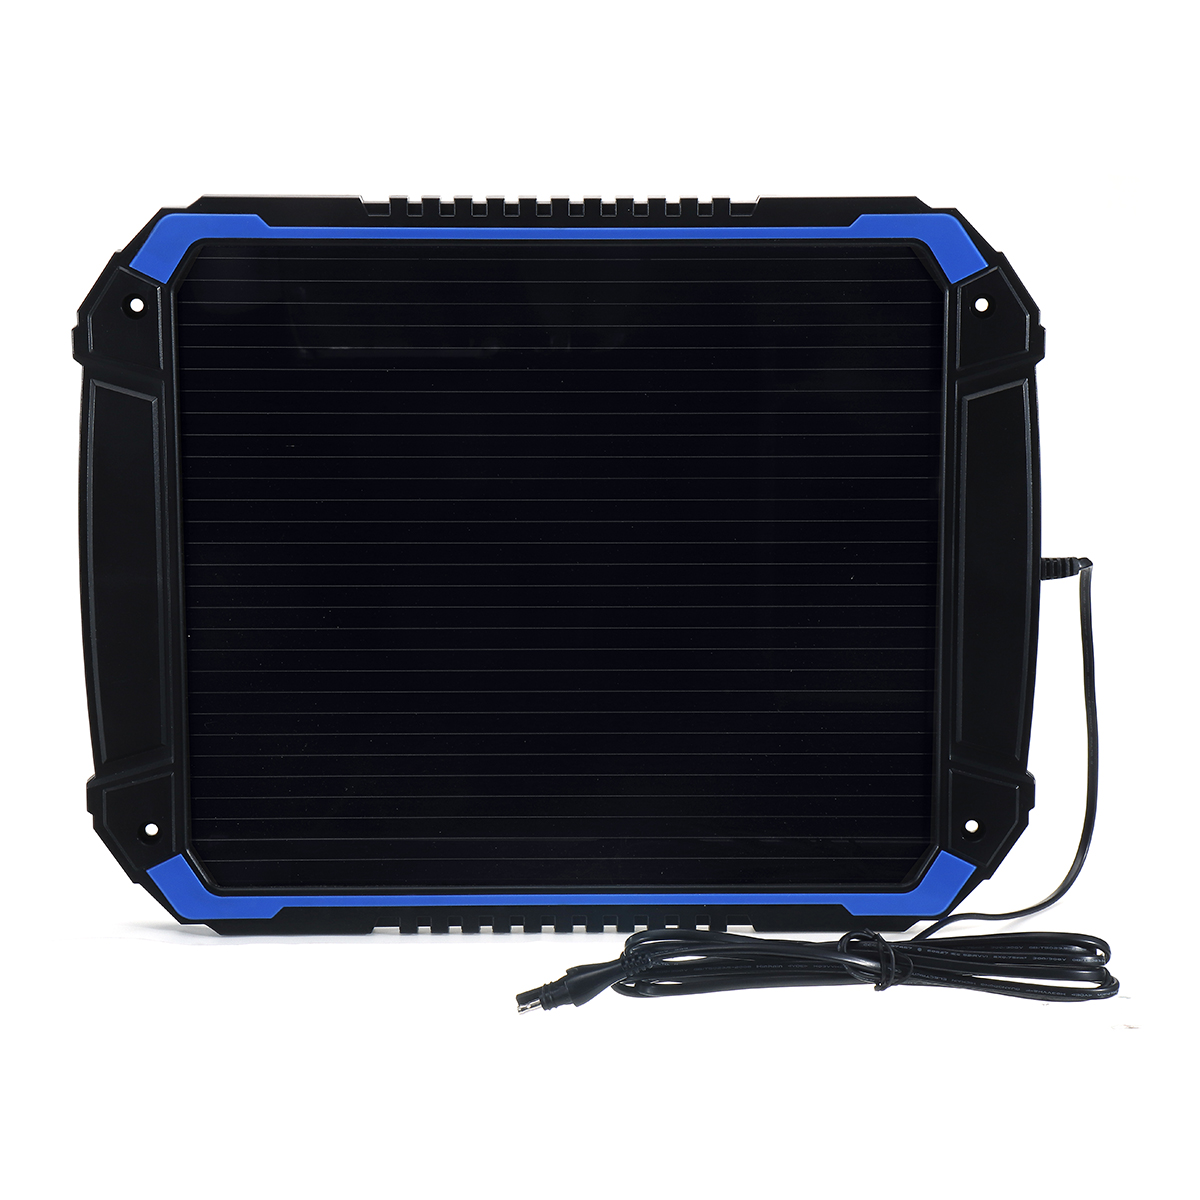 48W-18V-Portable-Solar-Panel-Power-Battery-Charger-Backup-for-Automotive-Motorcycle-Boat-Marine-RV-e-1451189-3